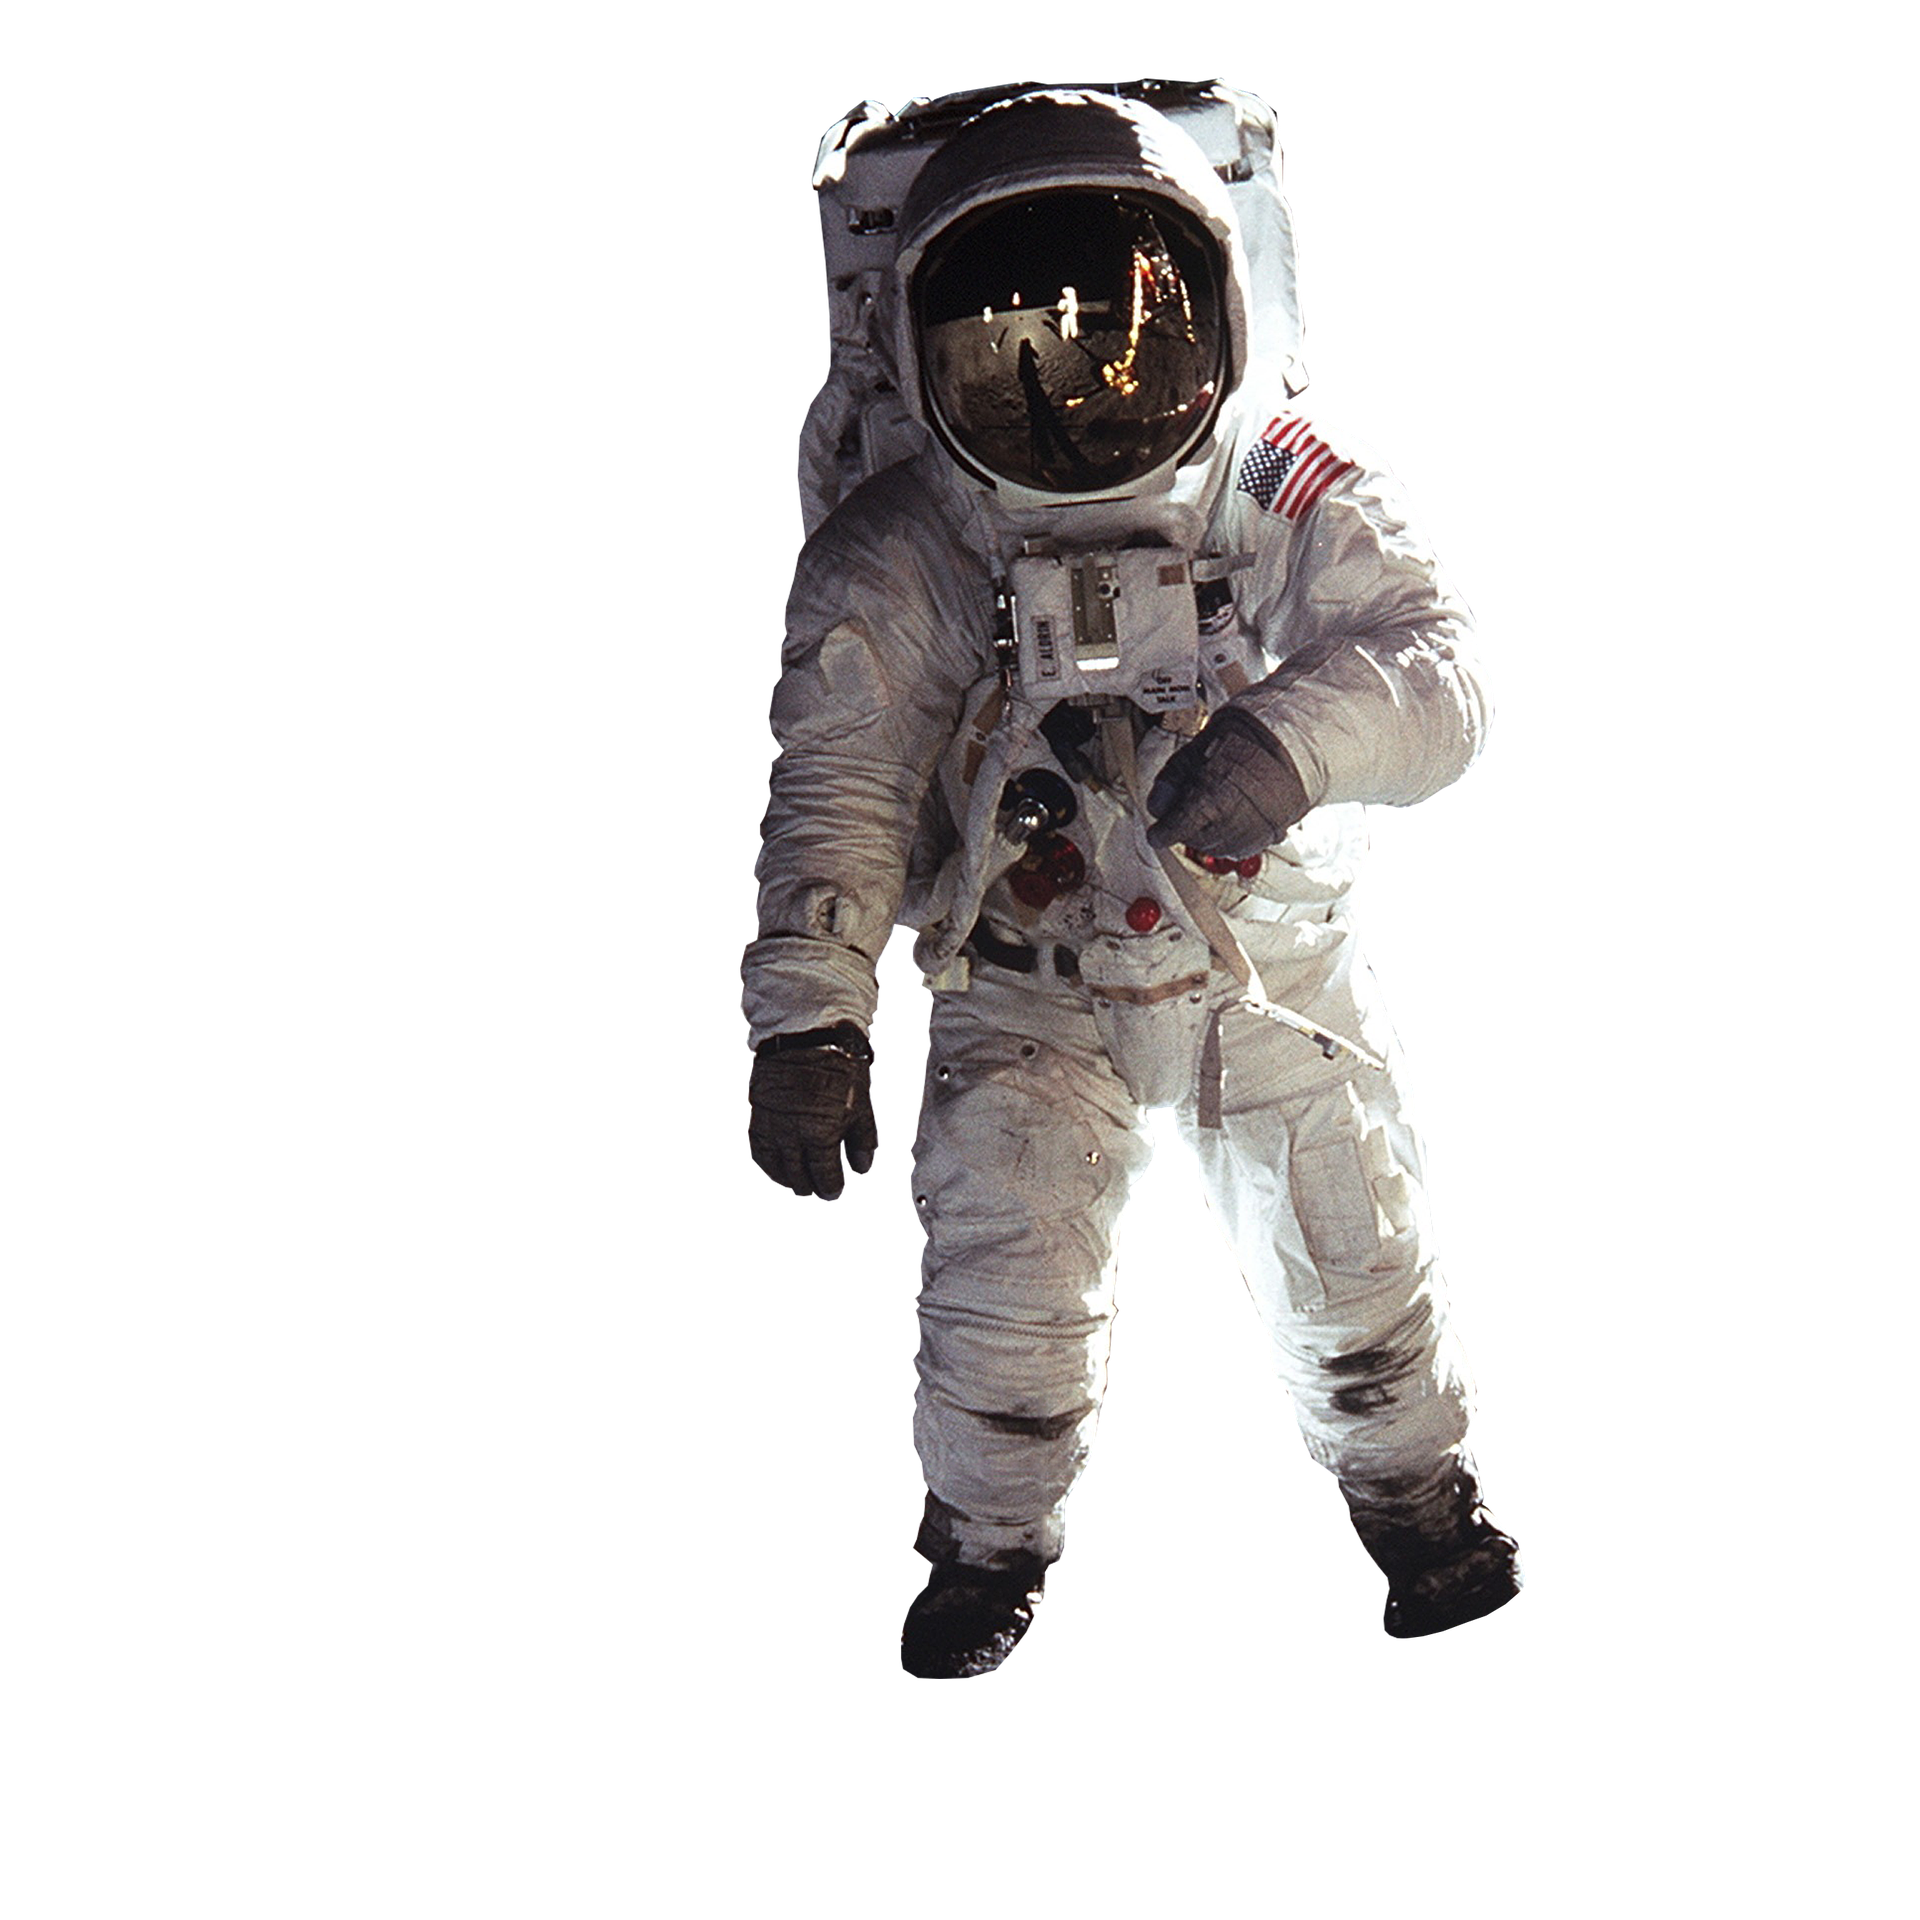 astronaut-2844241_1920.png